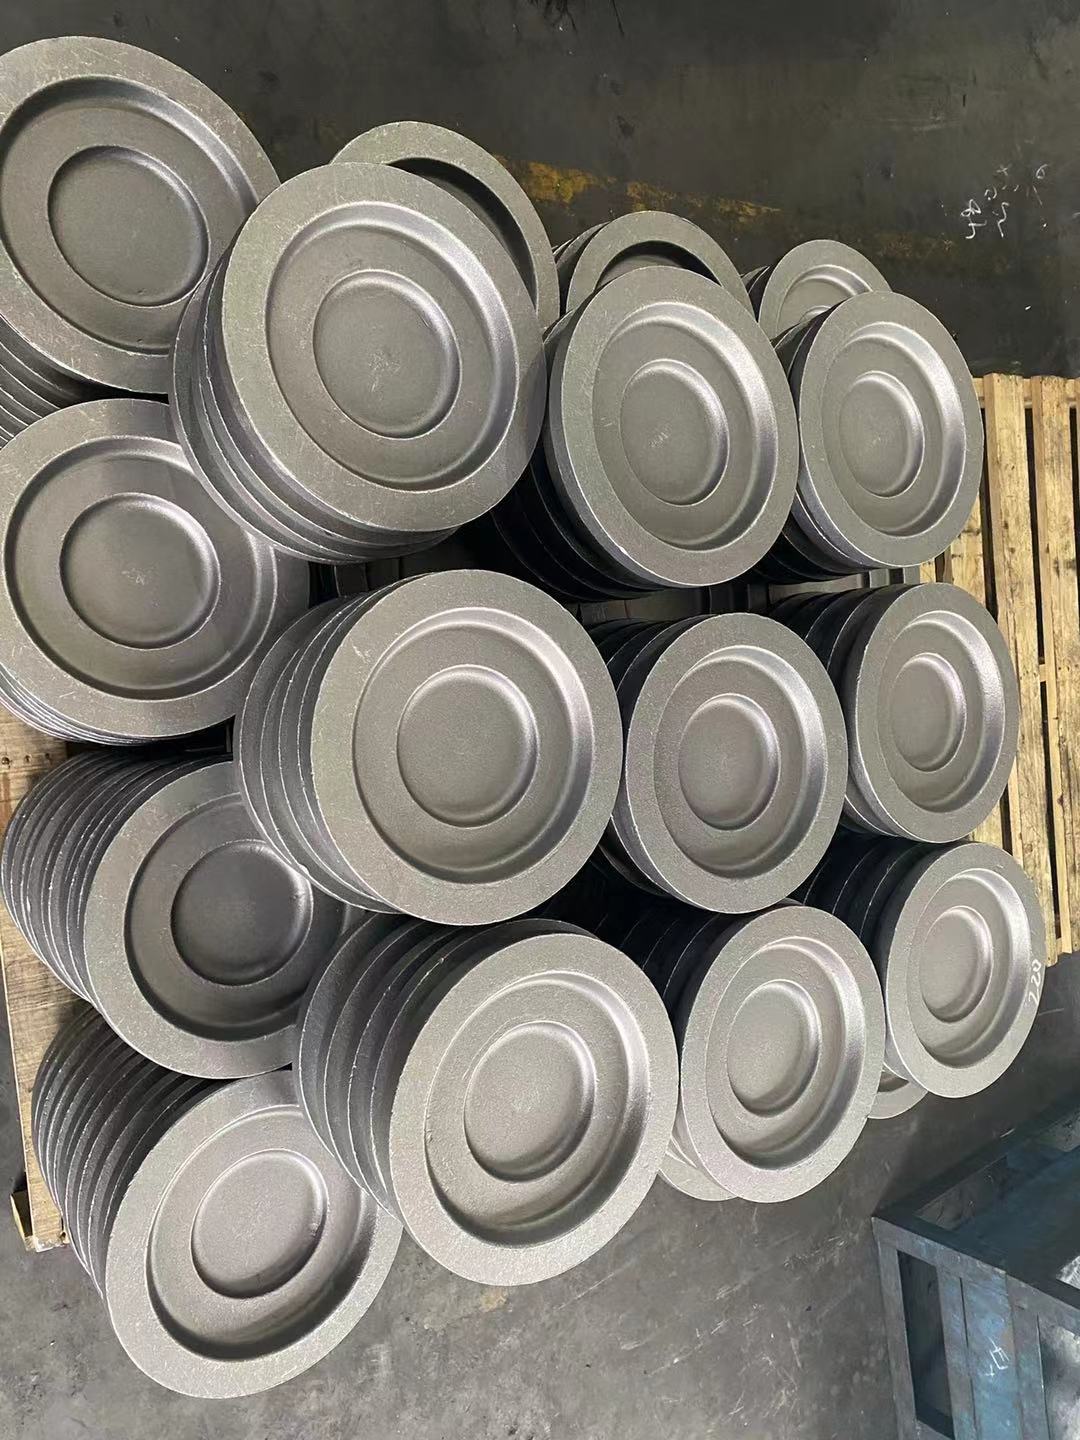 How can forgings be processed better?